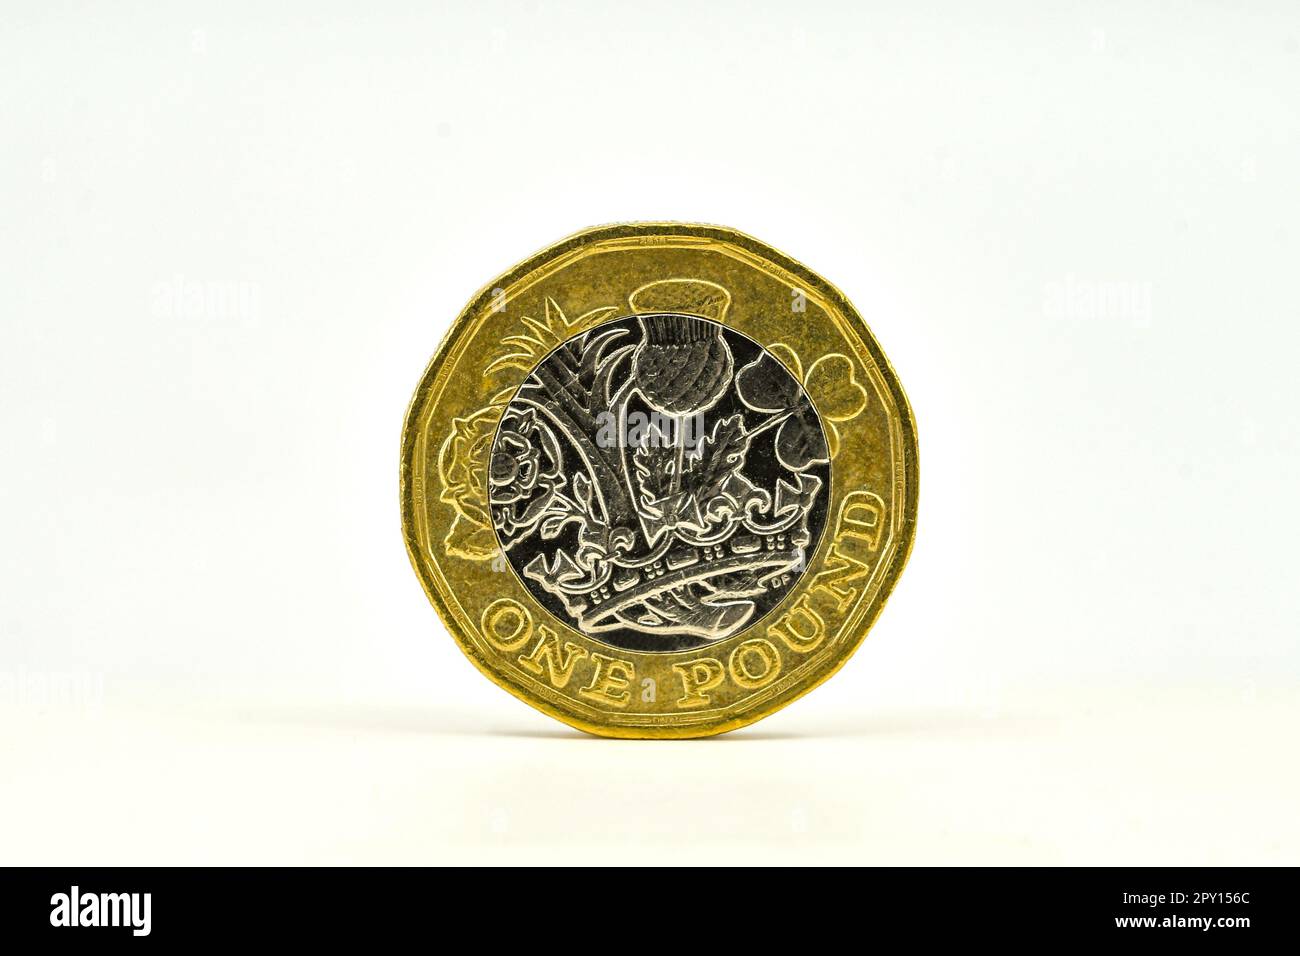 British one pound coin standing on its edge isolated aganst a plain white background. Copy space. Stock Photo